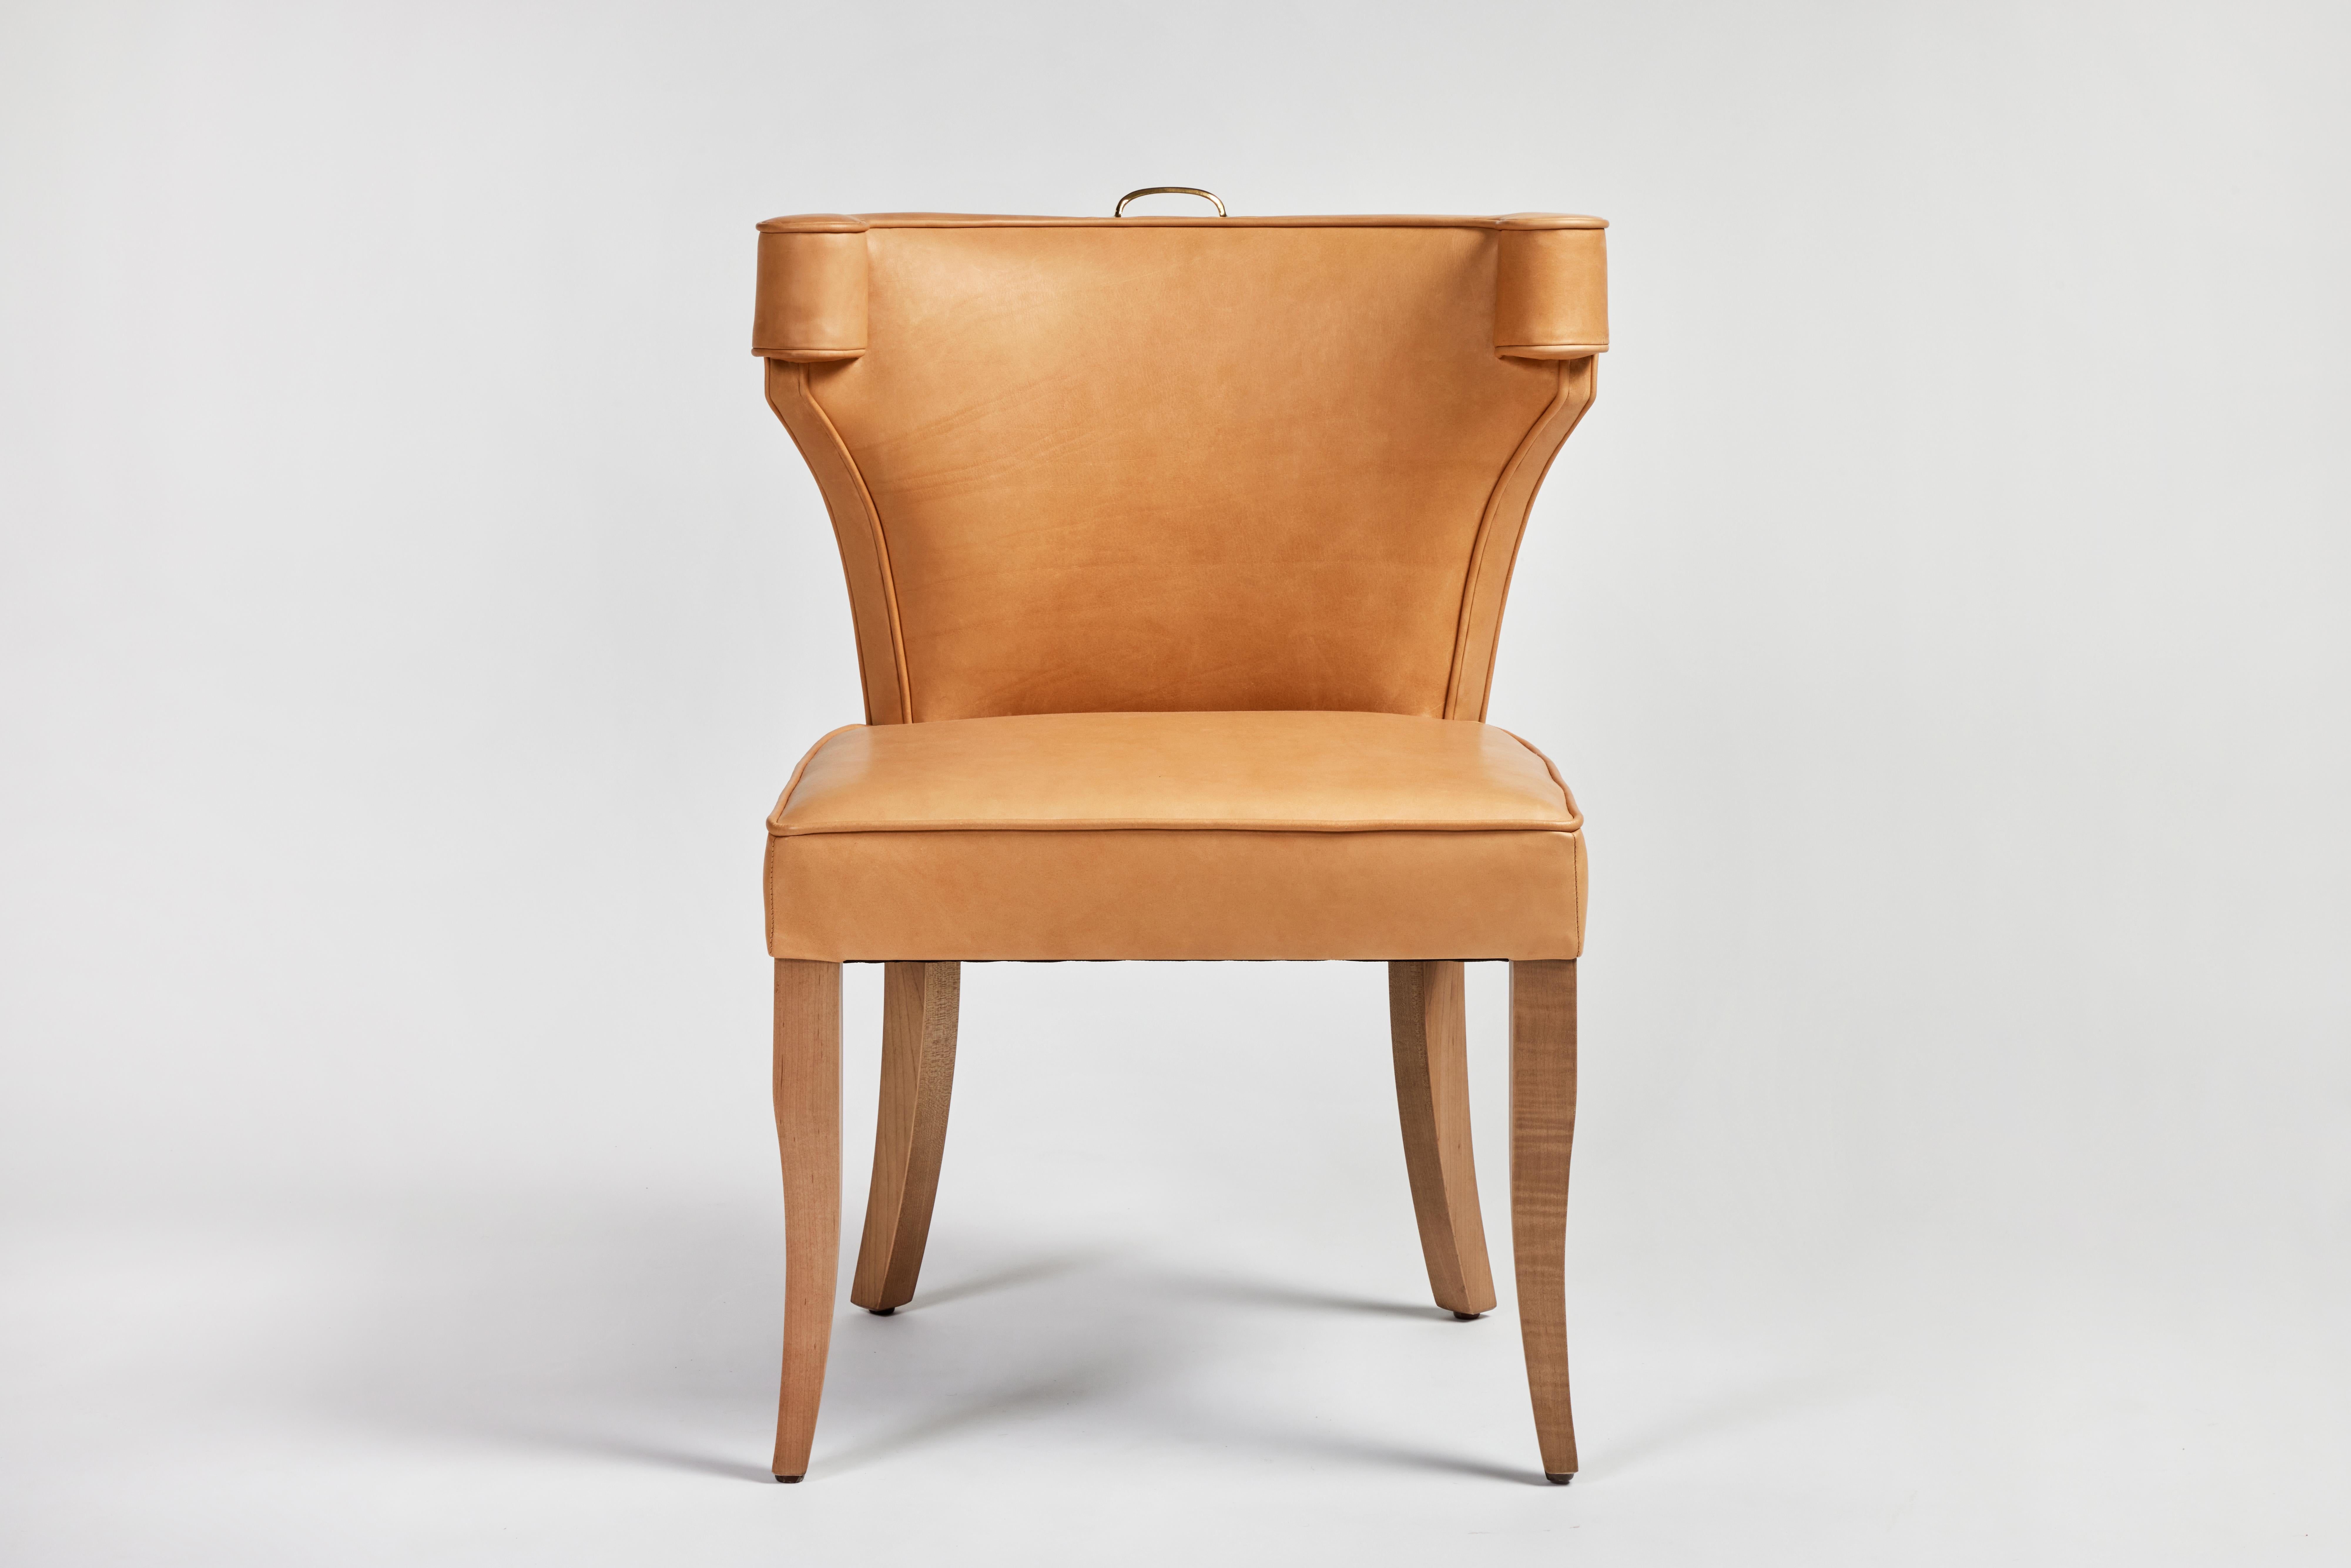 The Martin and Brockett Hale chair has a fully upholstered curved back, without nailhead trim. Oak saber legs with an unlacquered brass handle detail. 

C.O.M. only -3 yards 
Other wood finishes available.

Lead time: 8-10 weeks.